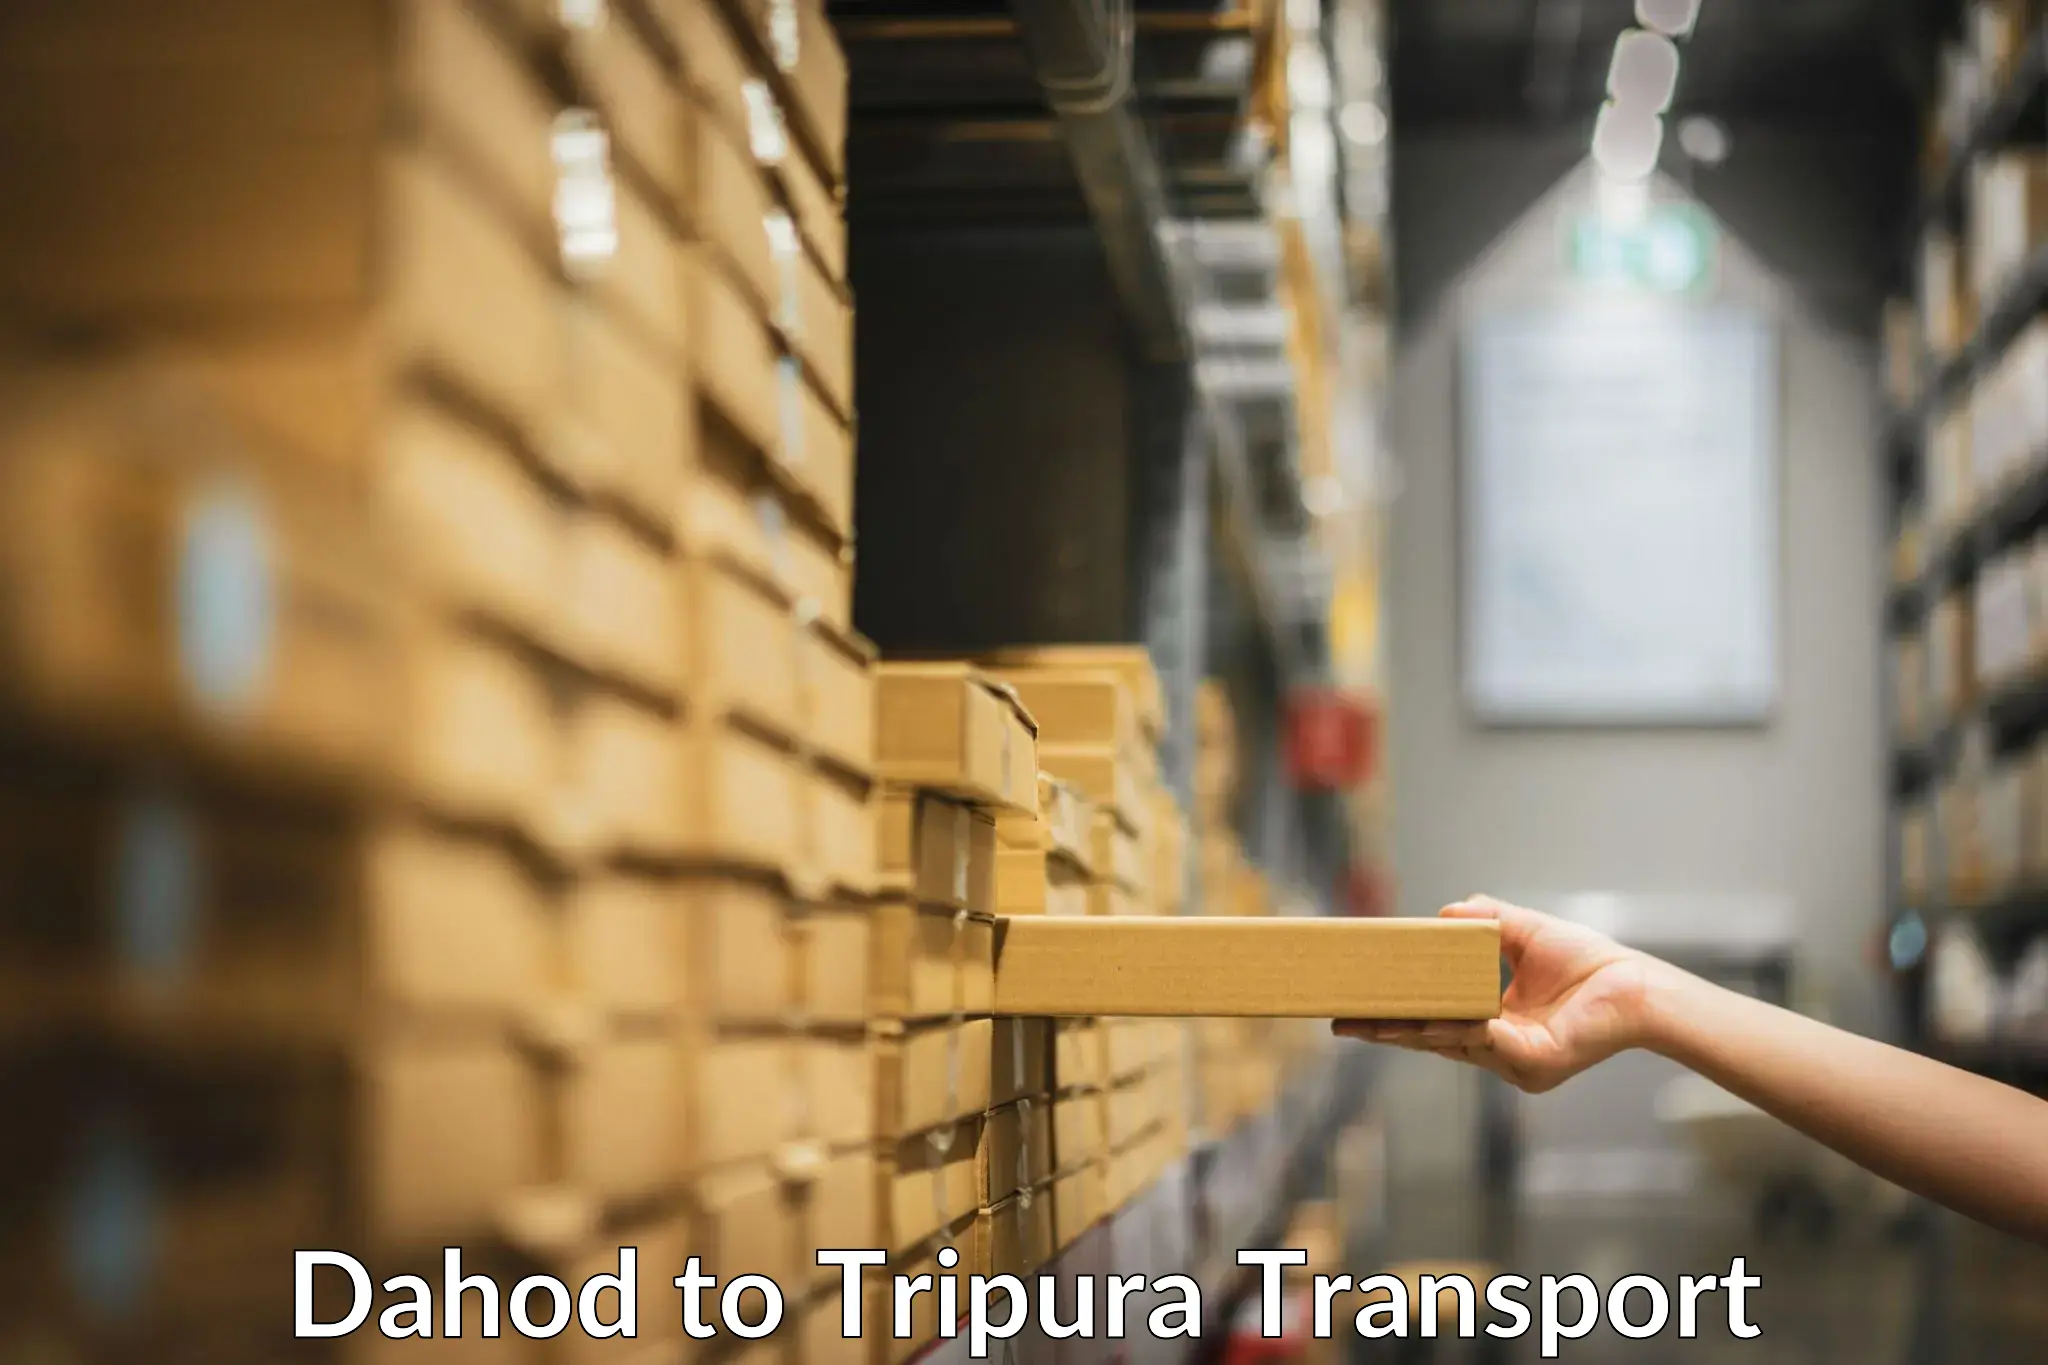 Transport services in Dahod to Udaipur Tripura